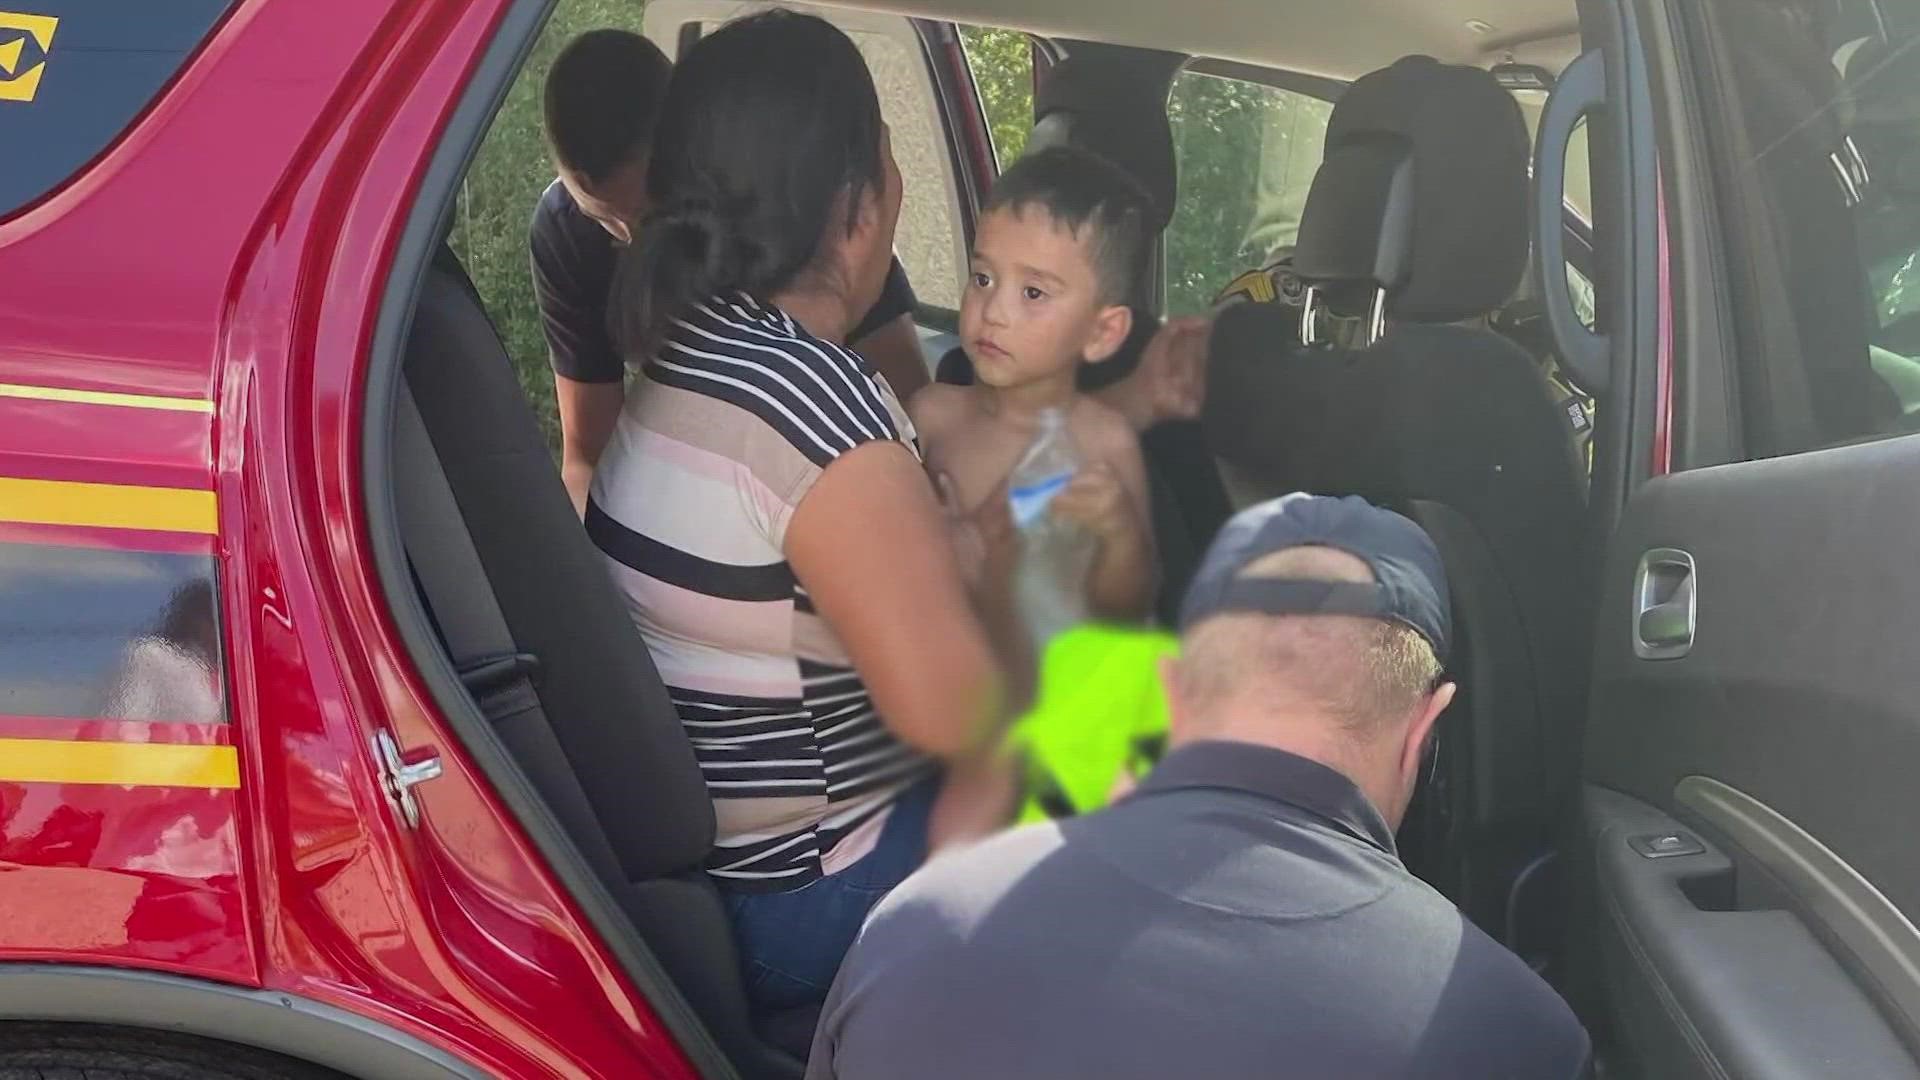 Search efforts were rewarded Saturday when 3-year-old Christopher Ramirez was found three days after he was reported missing.